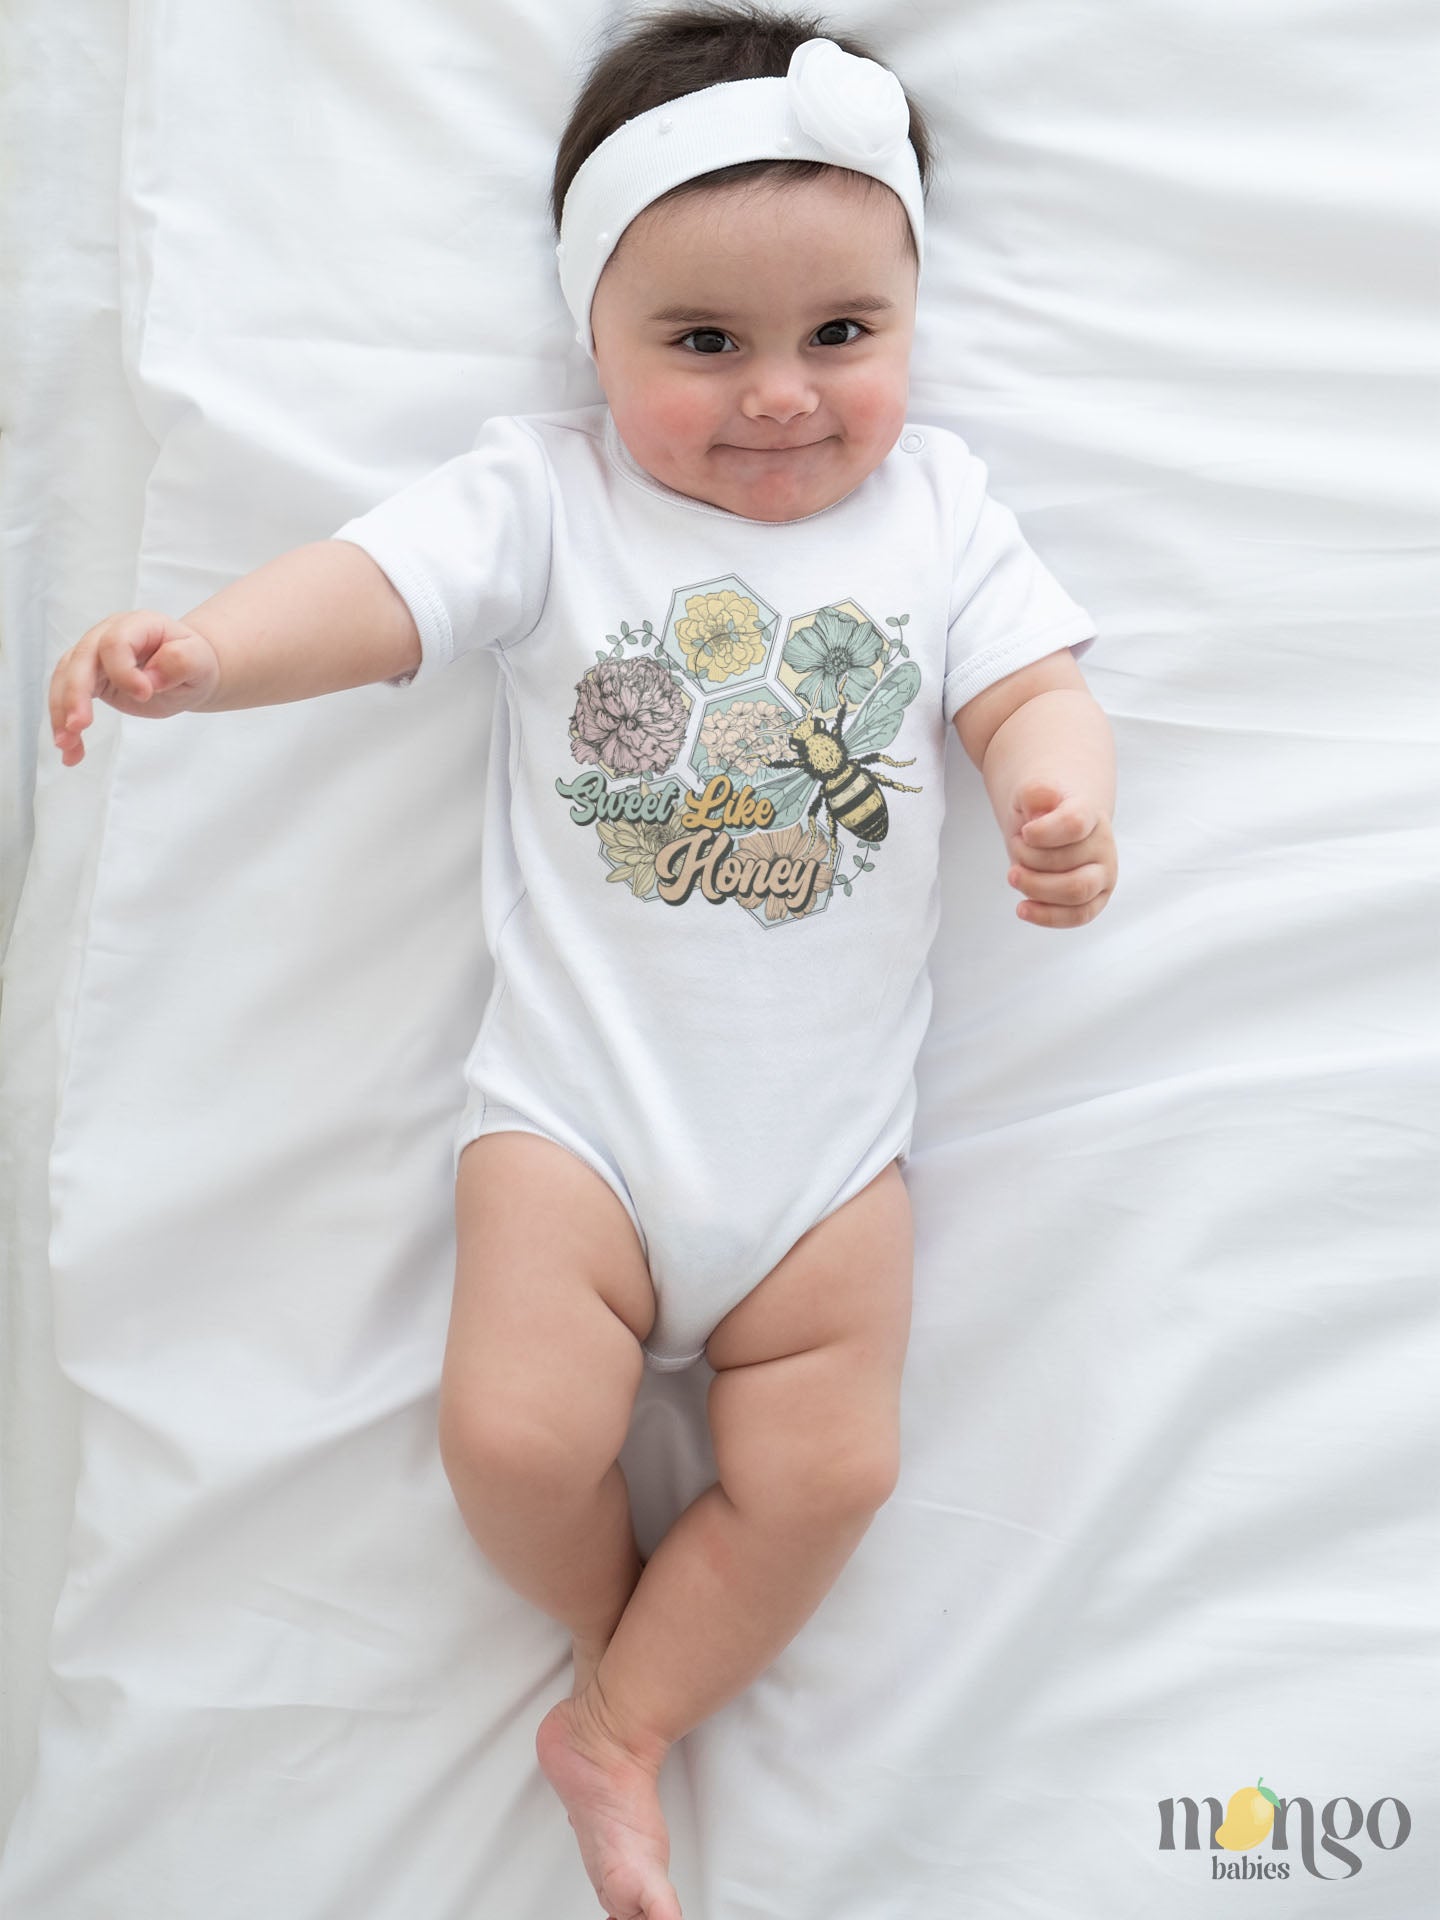 White Baby Bodysuit with a cute retro graphic of flowers and bees, and the text 'Sweet Like Honey.' Trendy and playful design for stylish outfits. 